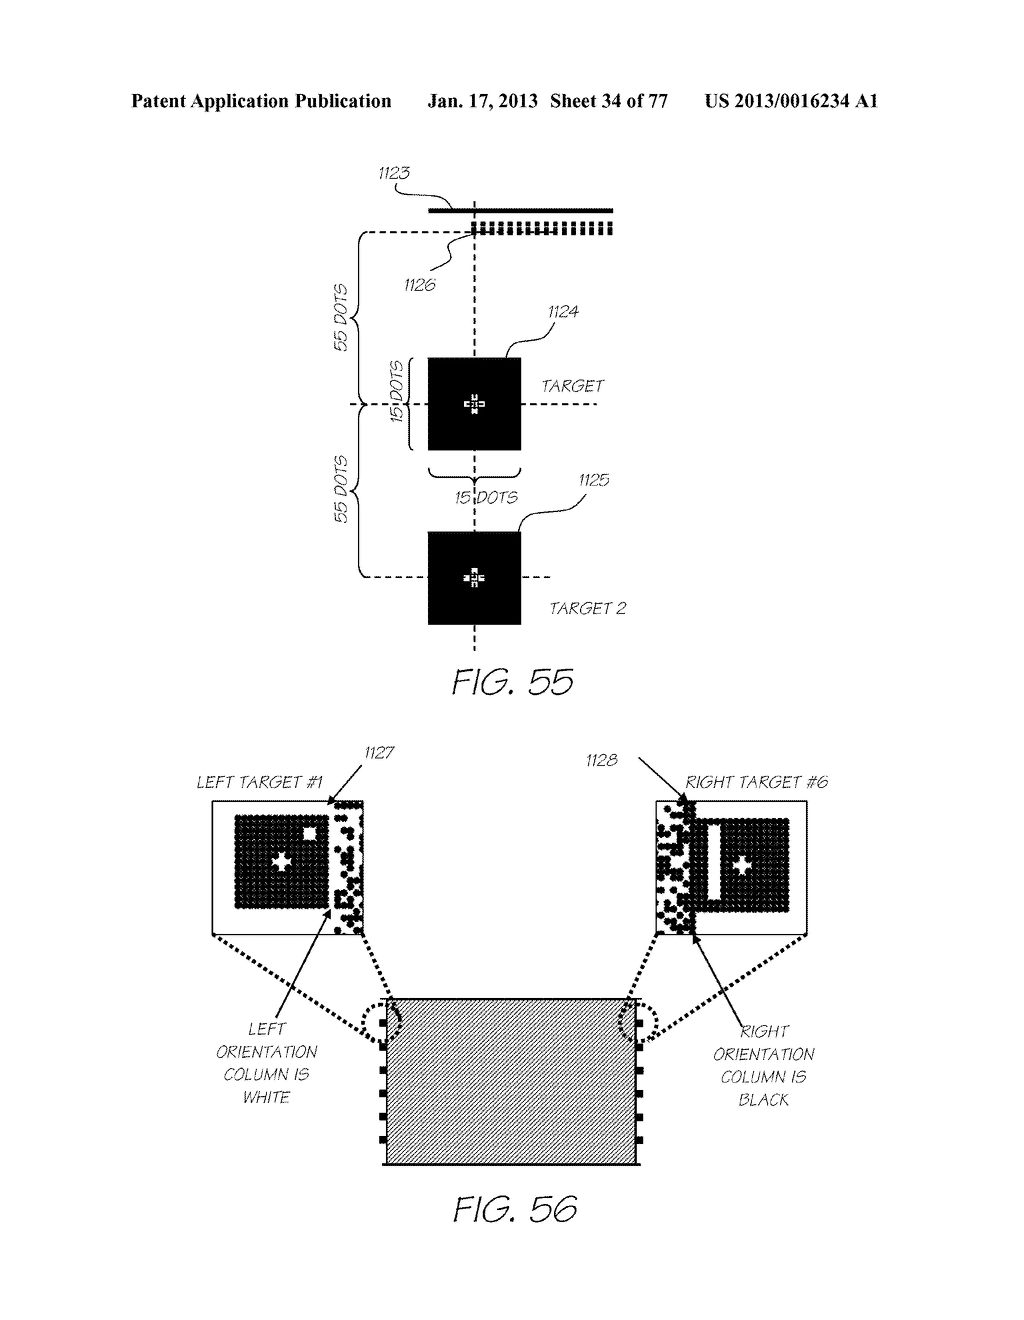 PORTABLE IMAGING DEVICE WITH MULTI-CORE PROCESSOR AND ORIENTATION SENSOR - diagram, schematic, and image 35